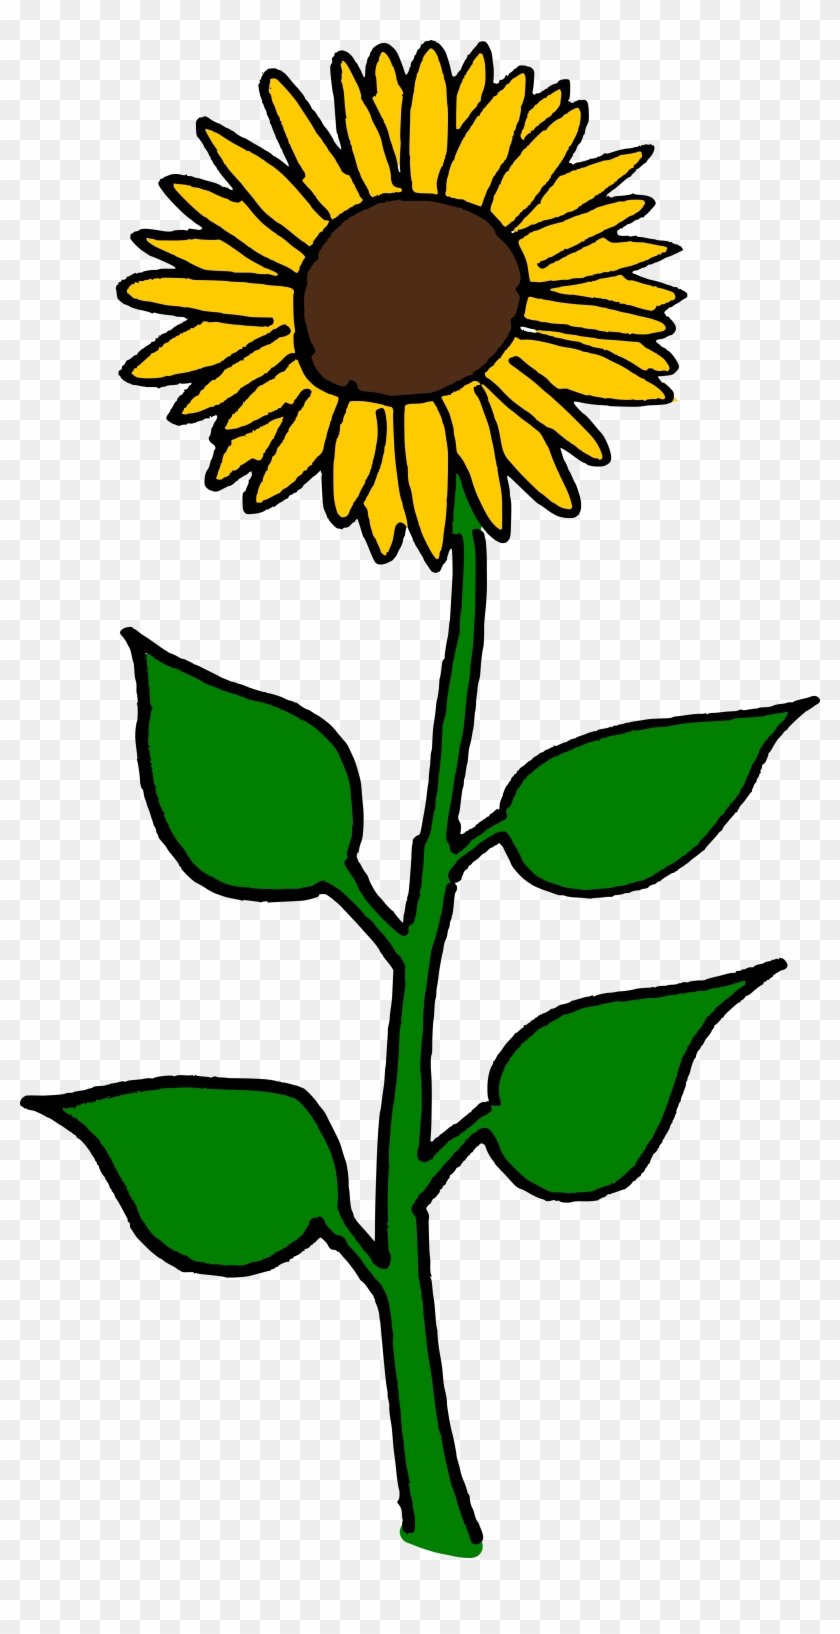 3961 X 7520 14 - Giant Sunflower Clip Art - Png Download #179259